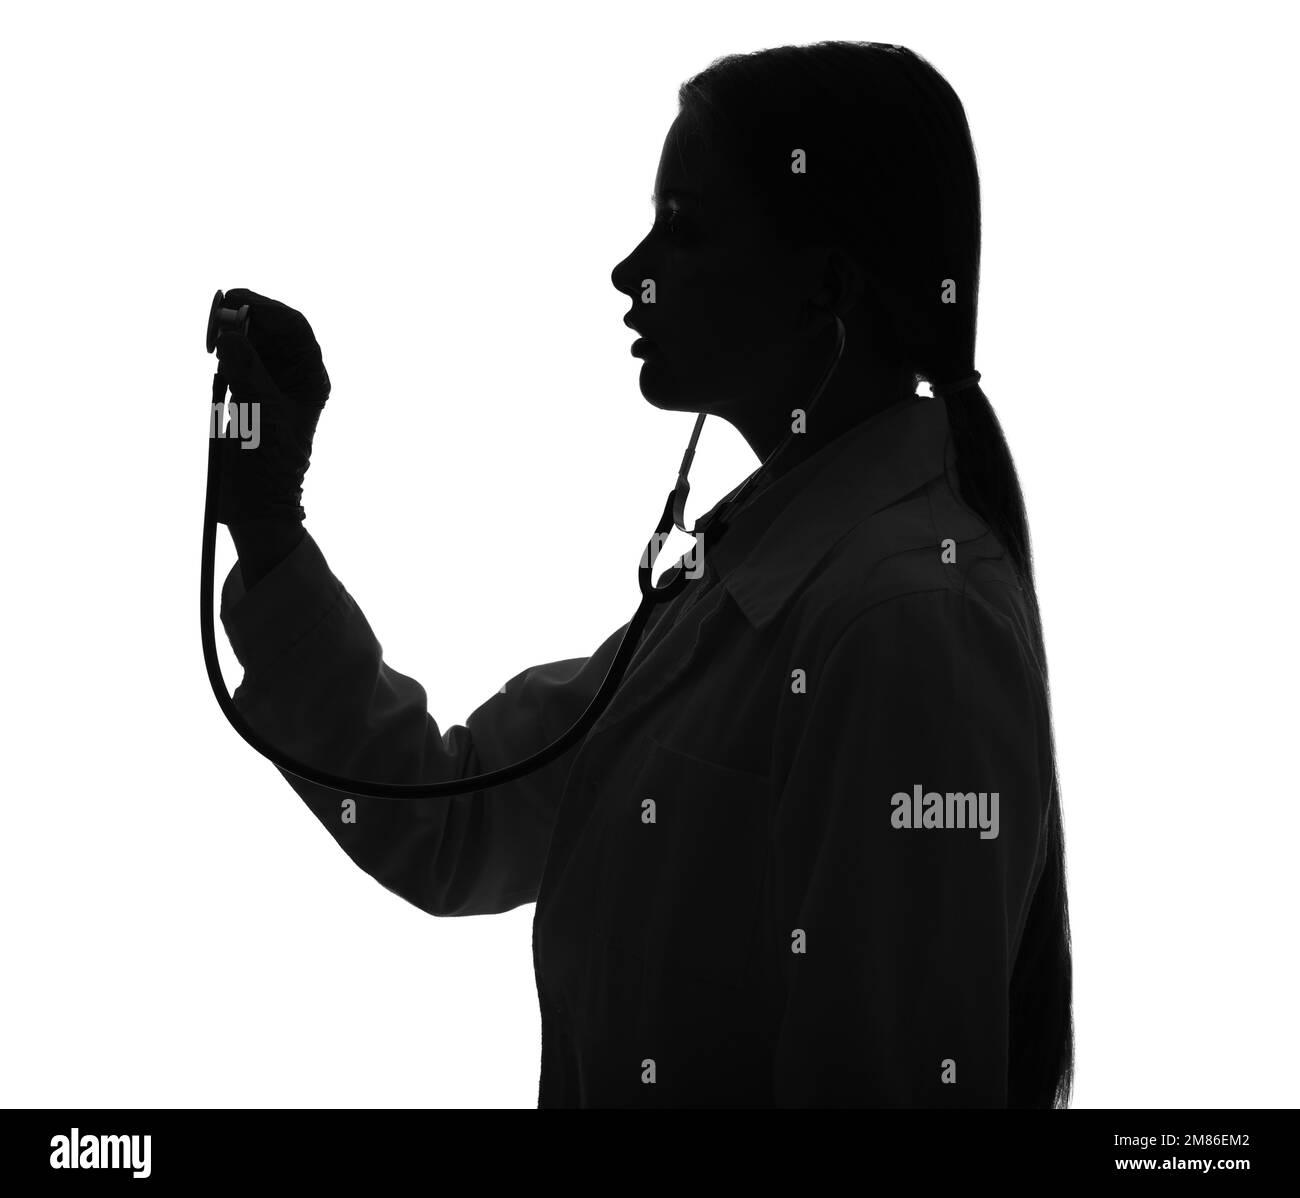 Doctor silhouette Black and White Stock Photos & Images - Alamy